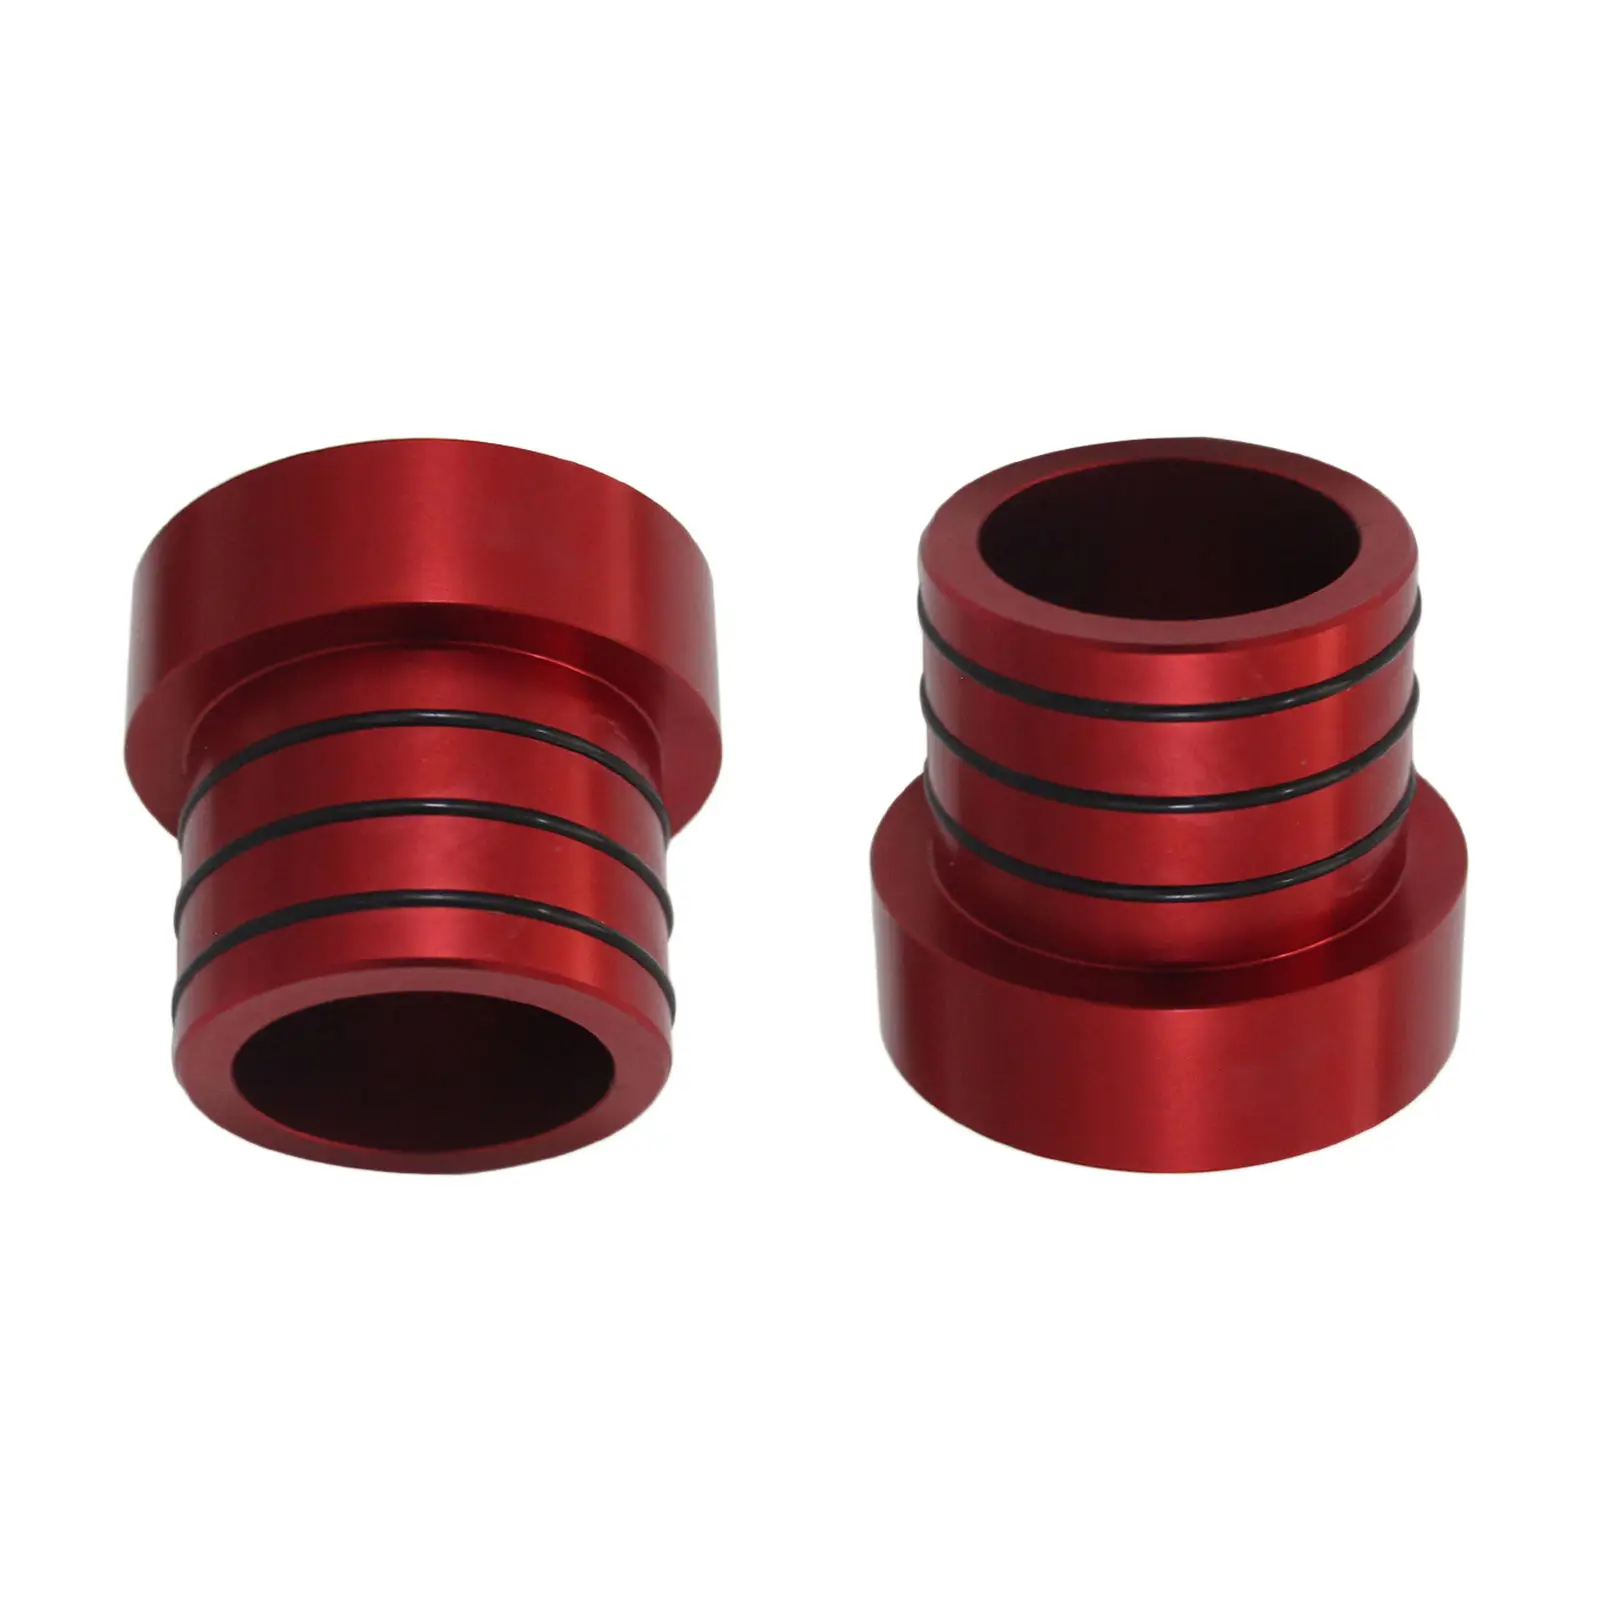 Front Left & Right Axle Tube Seals Pair Kit For 84-01 Jeep Cherokee XJ / 87-18 (Except 96) Jeep Wrangler YJ TJ LJ JK red/black